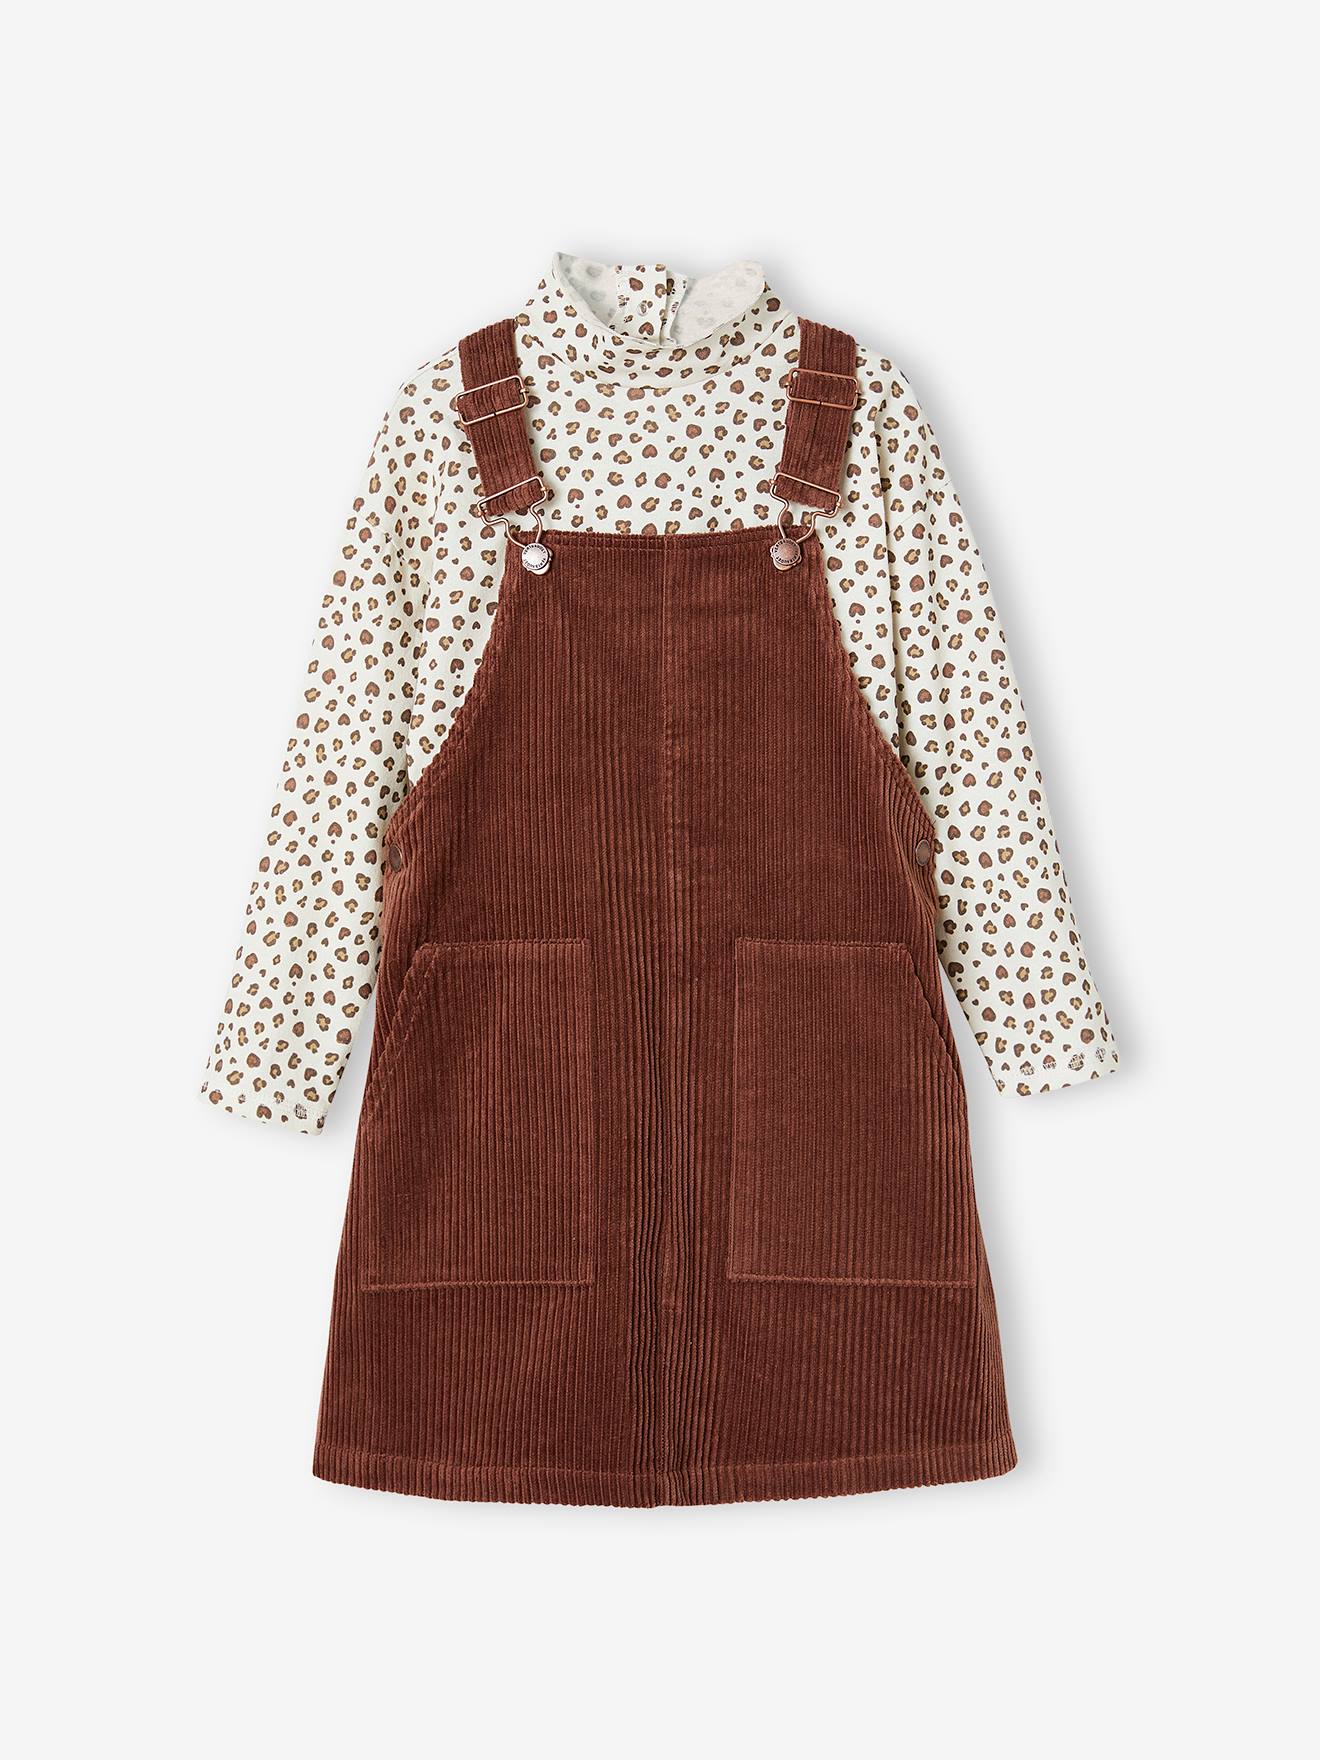 Top + Corduroy Dungaree Dress Outfit for Girls chocolate